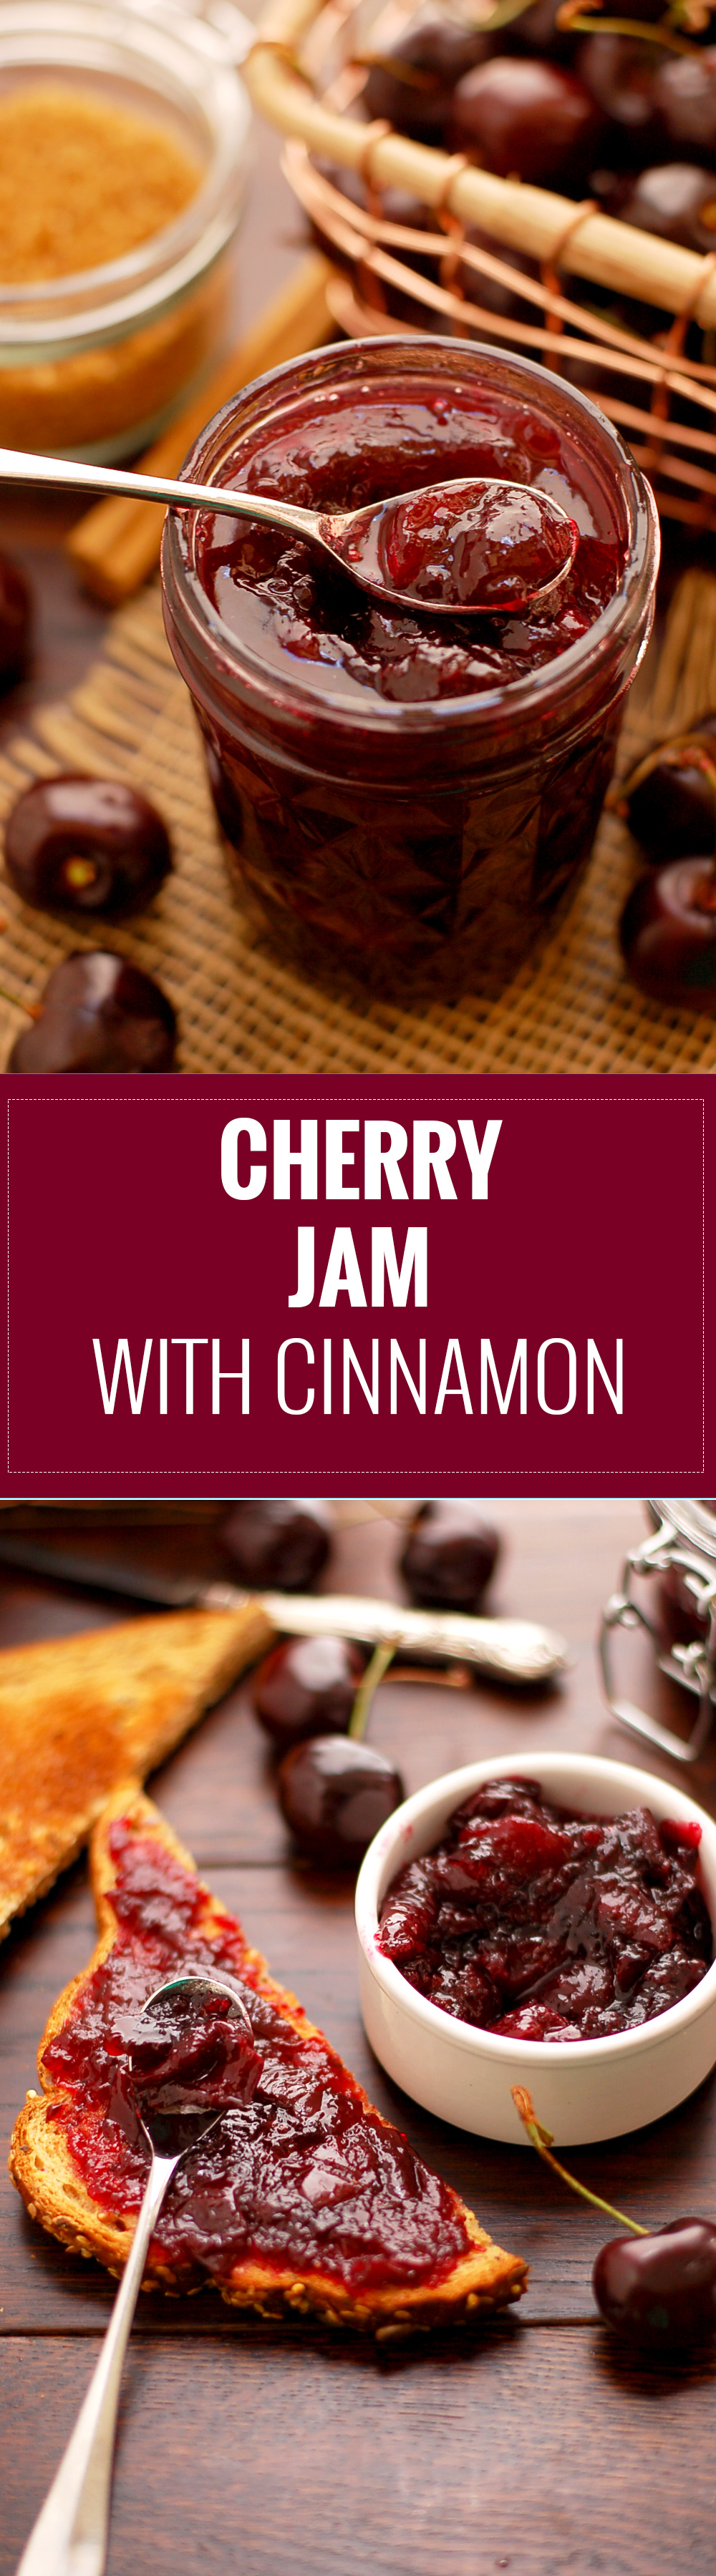 Delicious Cherry and Cinnamon Jam. This is super easy and tasty recipe, with the use of agar, 100% vegan and vegetarian! Yum!